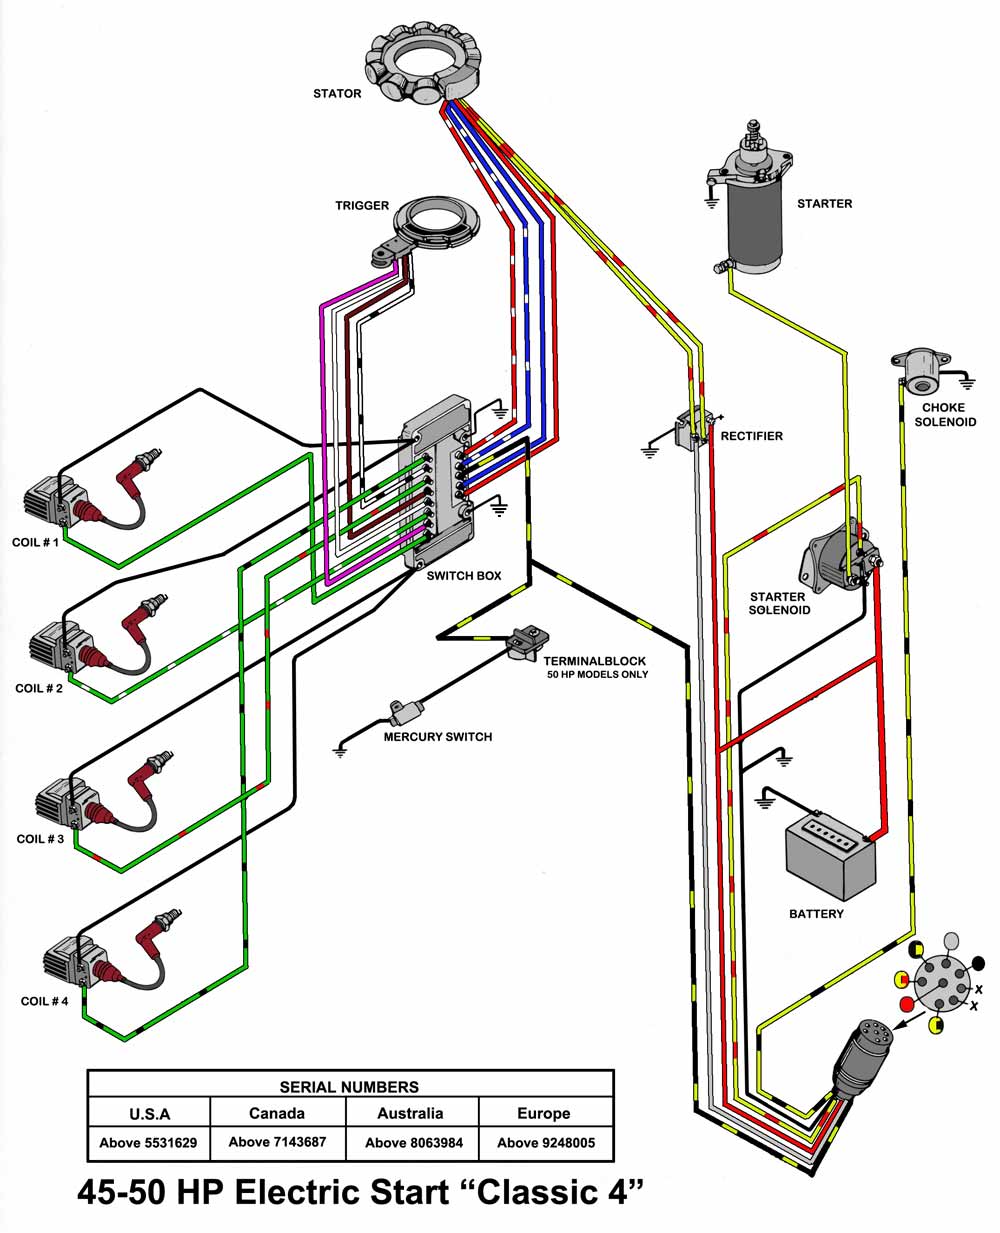 25 Hp Johnson Outboard Wiring Diagram Pdf from www.maxrules.com